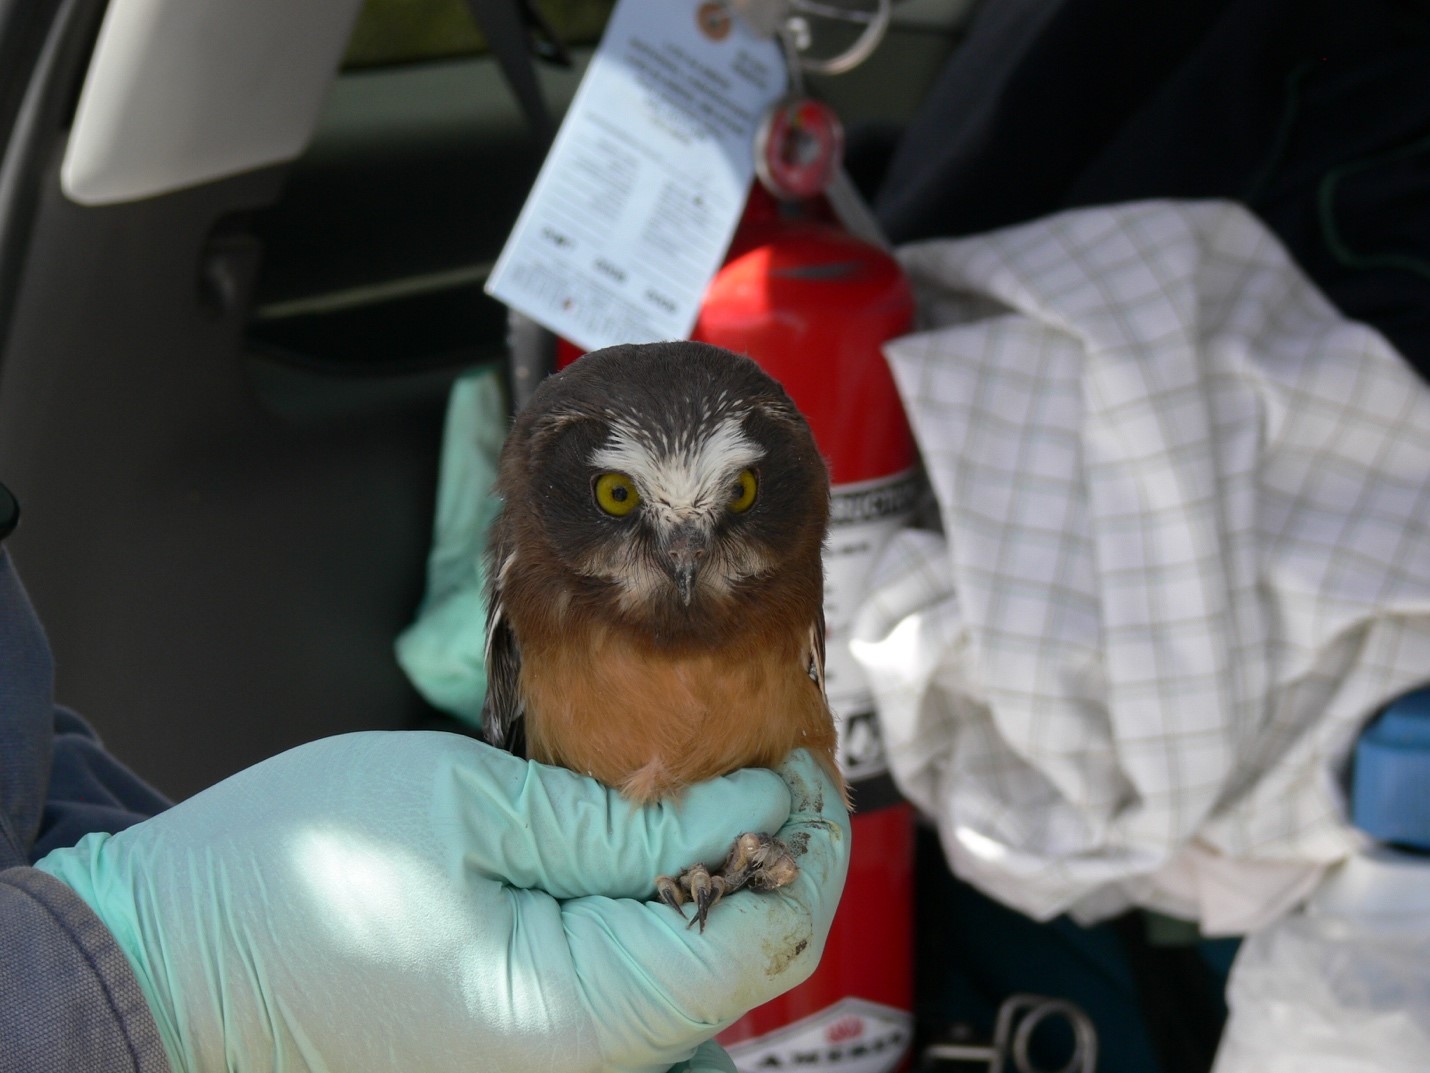 The researchers sampled both captive and wild birds to compare sialic acid results. Pictured here is a Northern Saw-Whet Owl.